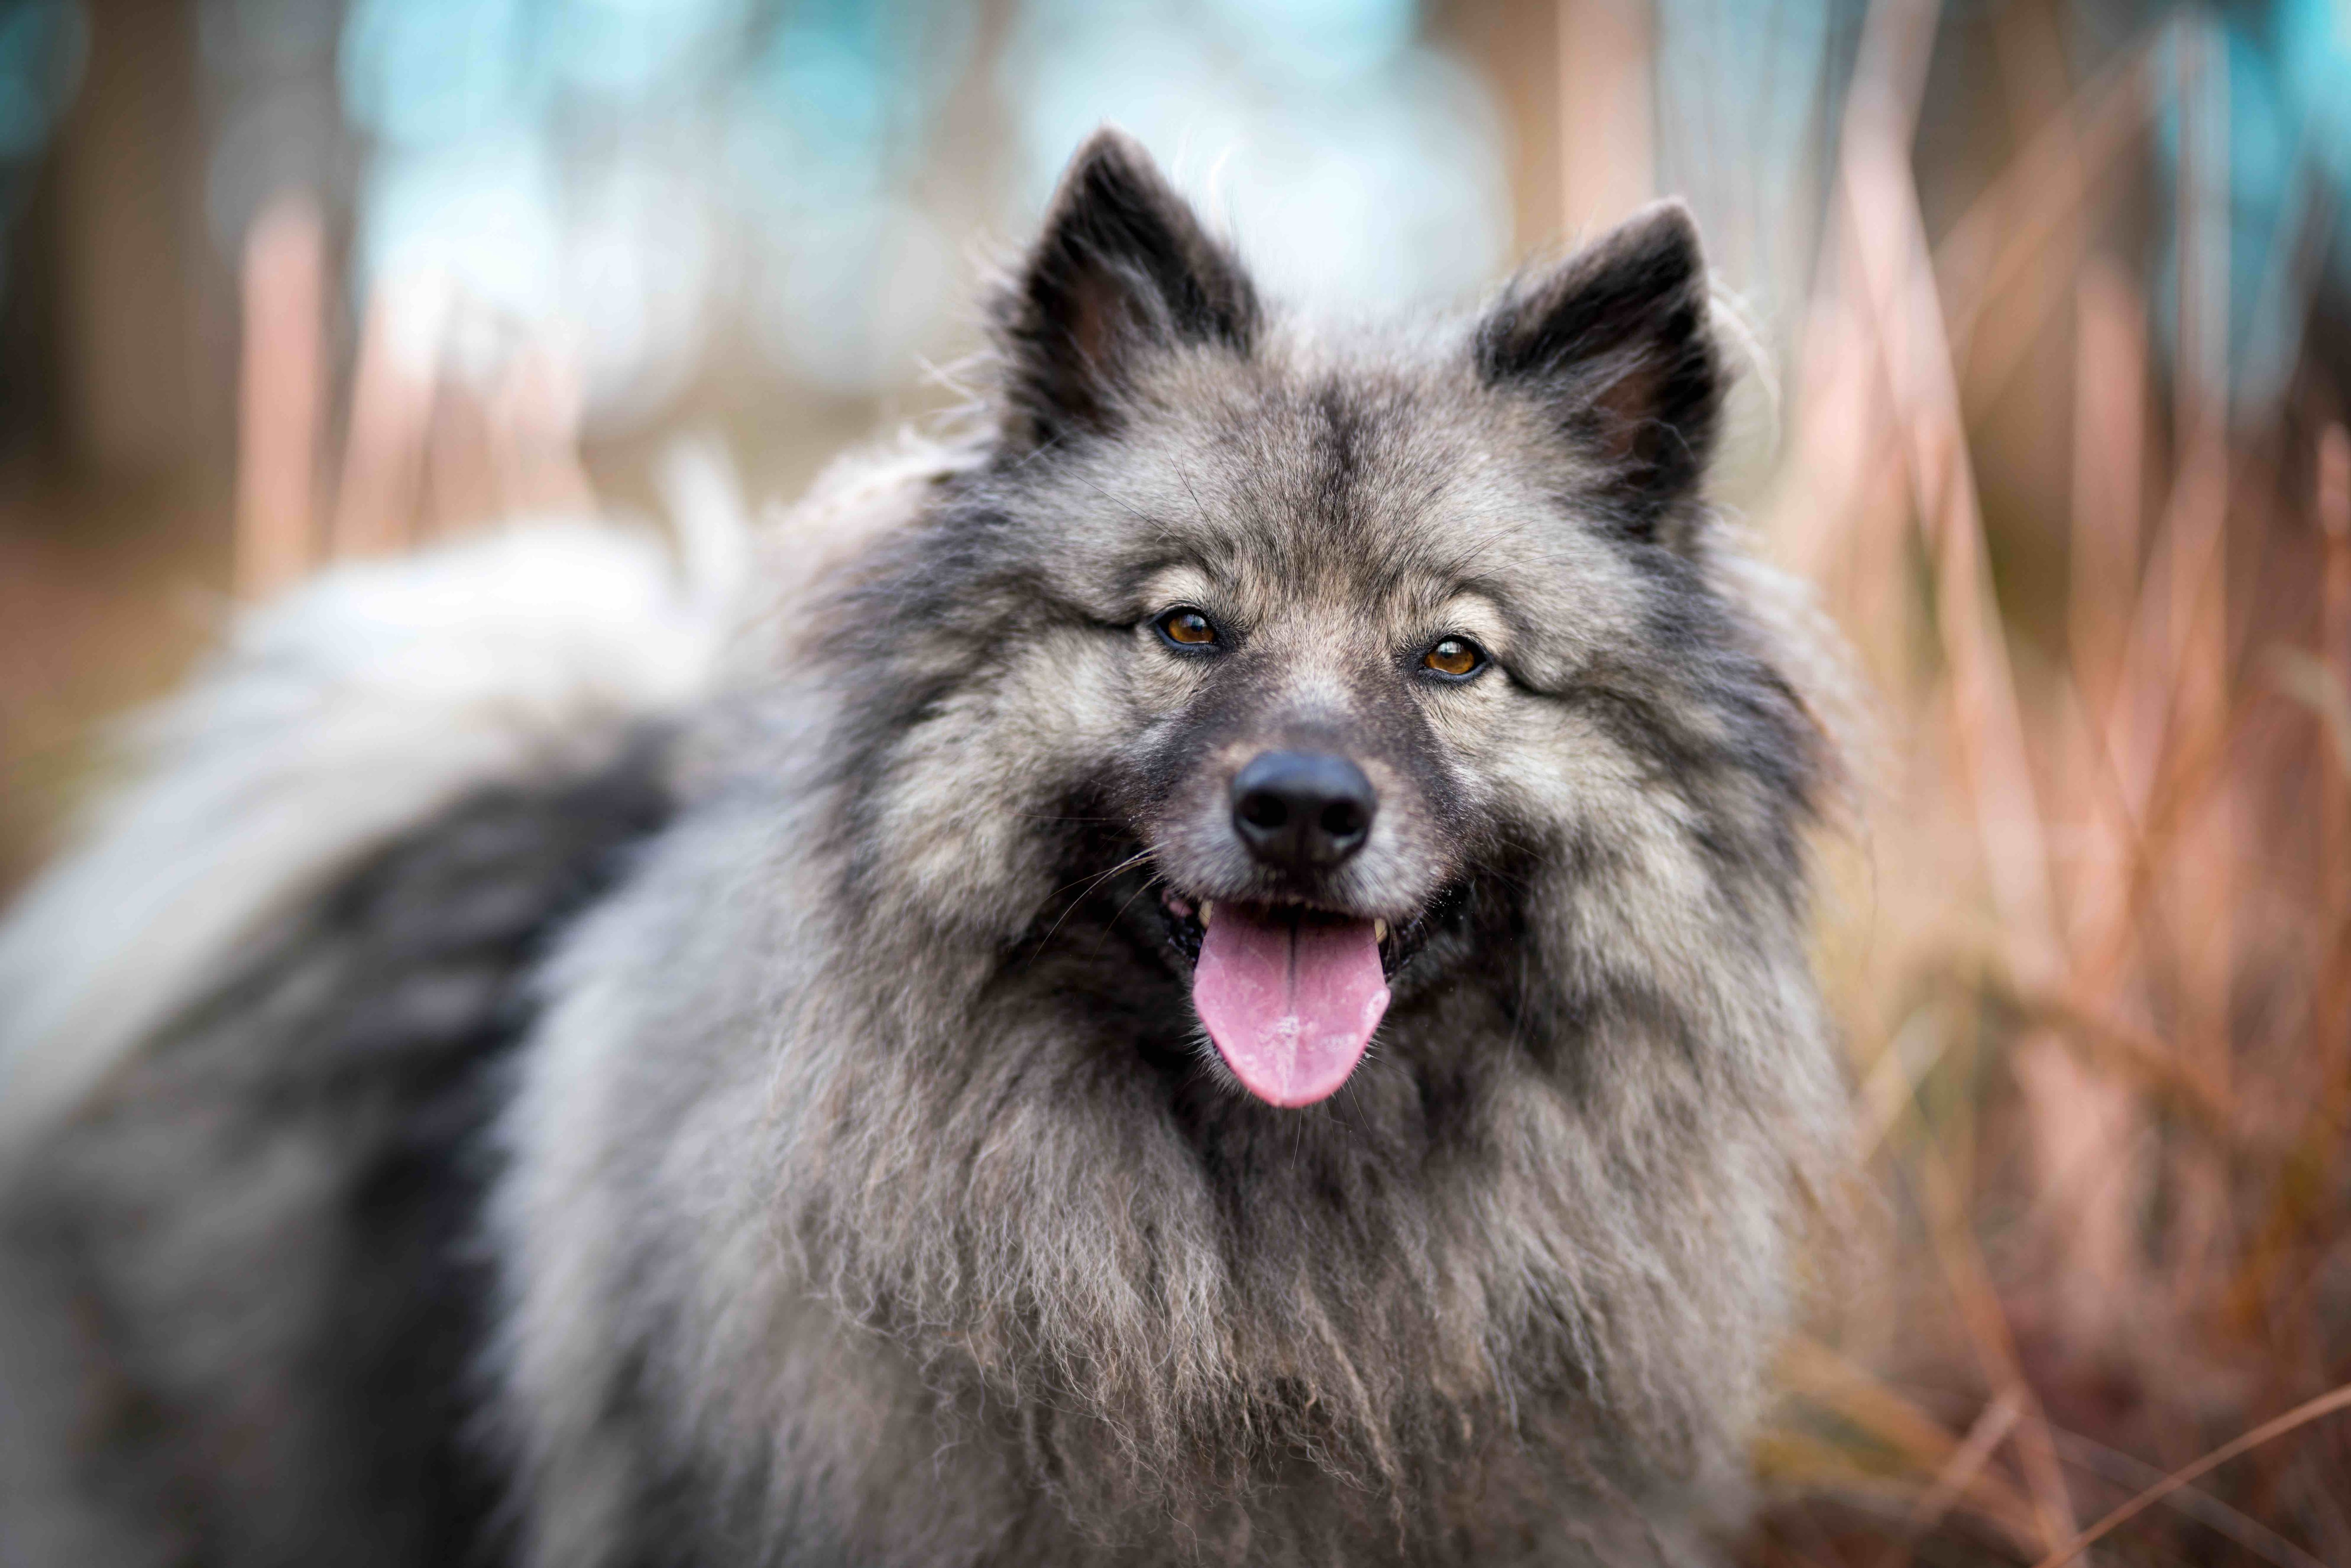 close-up of a fluffy gray keeshond dog smiling